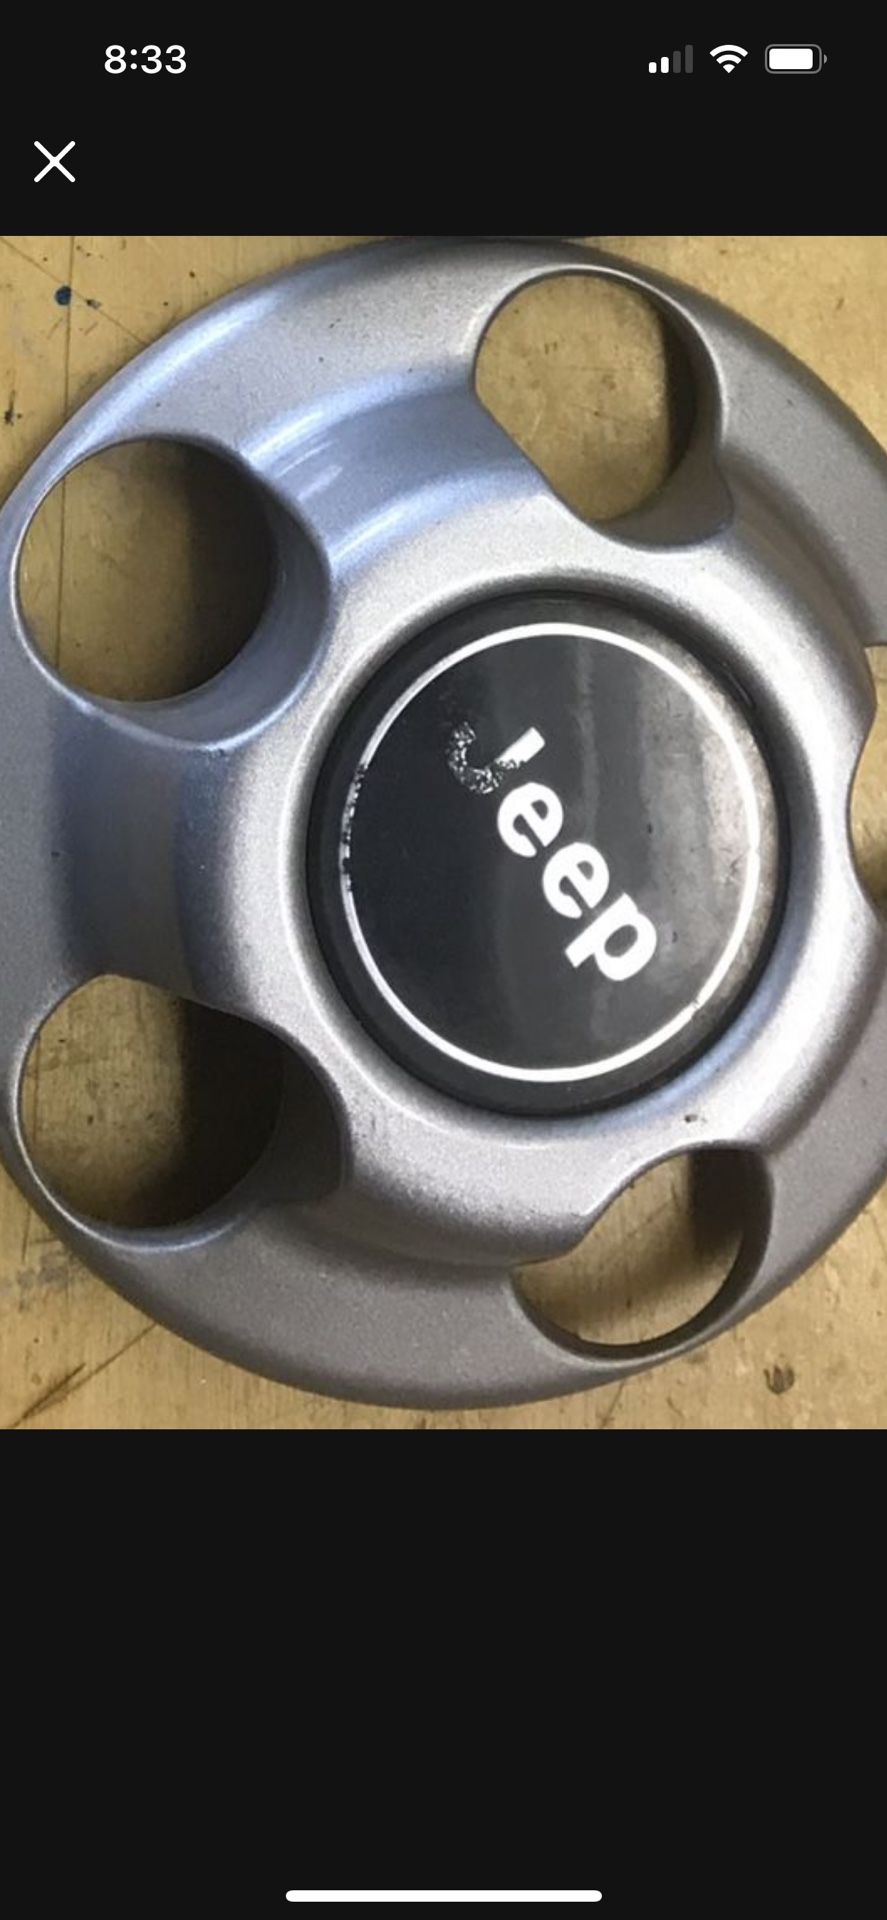 JEEP CHEROKEE WHEEL CENTER CAPS FOR SALE  $60 each. 